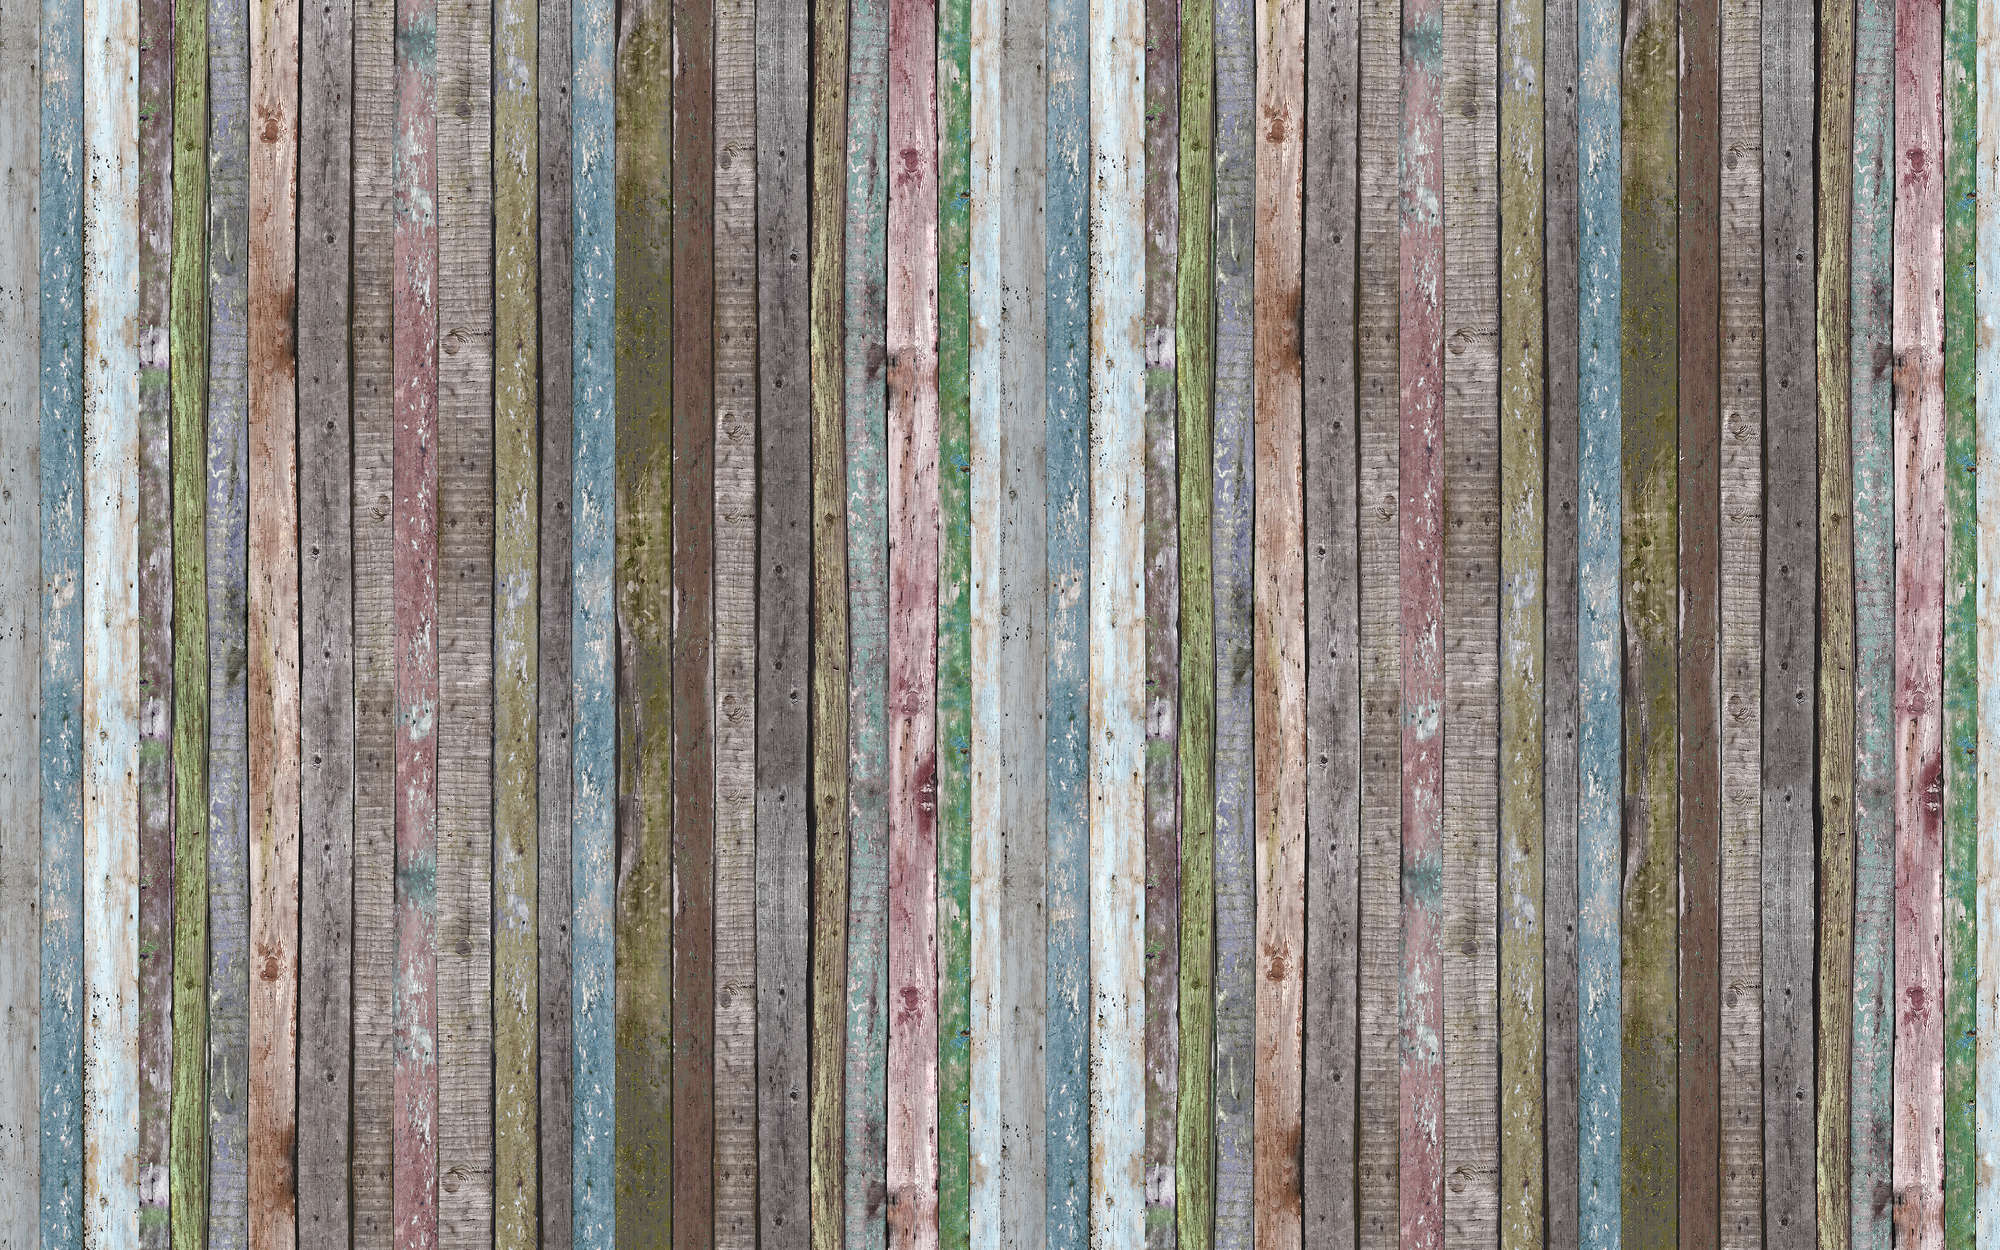             Wooden striped beams mural - mother-of-pearl smooth fleece
        